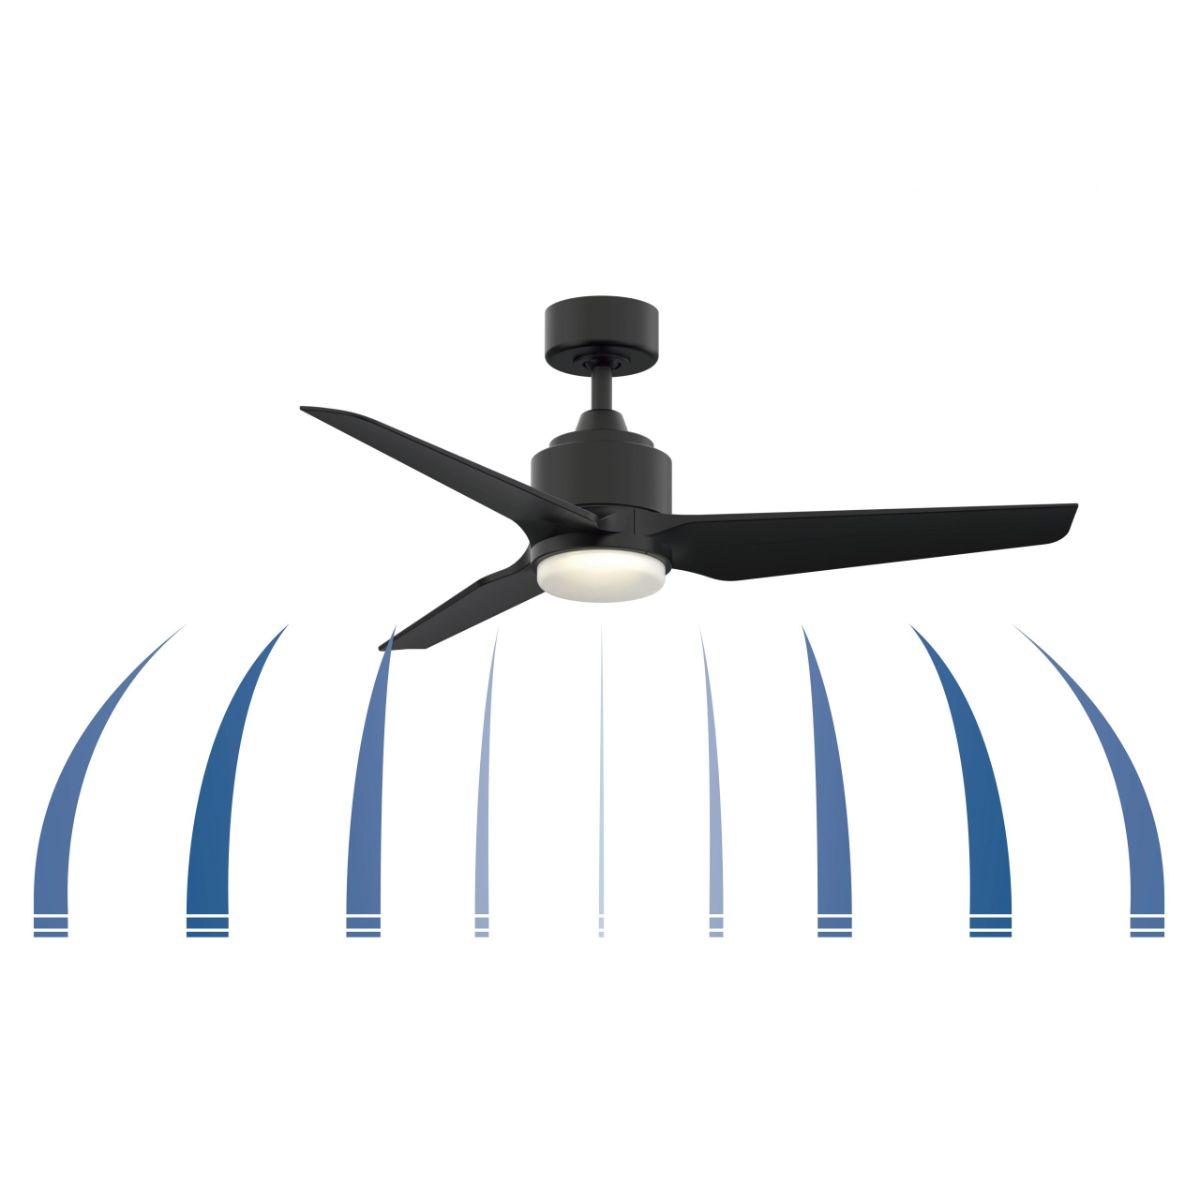 TriAire Custom Outdoor Ceiling Fan Motor With Remote, Set of 3 Blades (44 - 60 Inch) Sold Separately